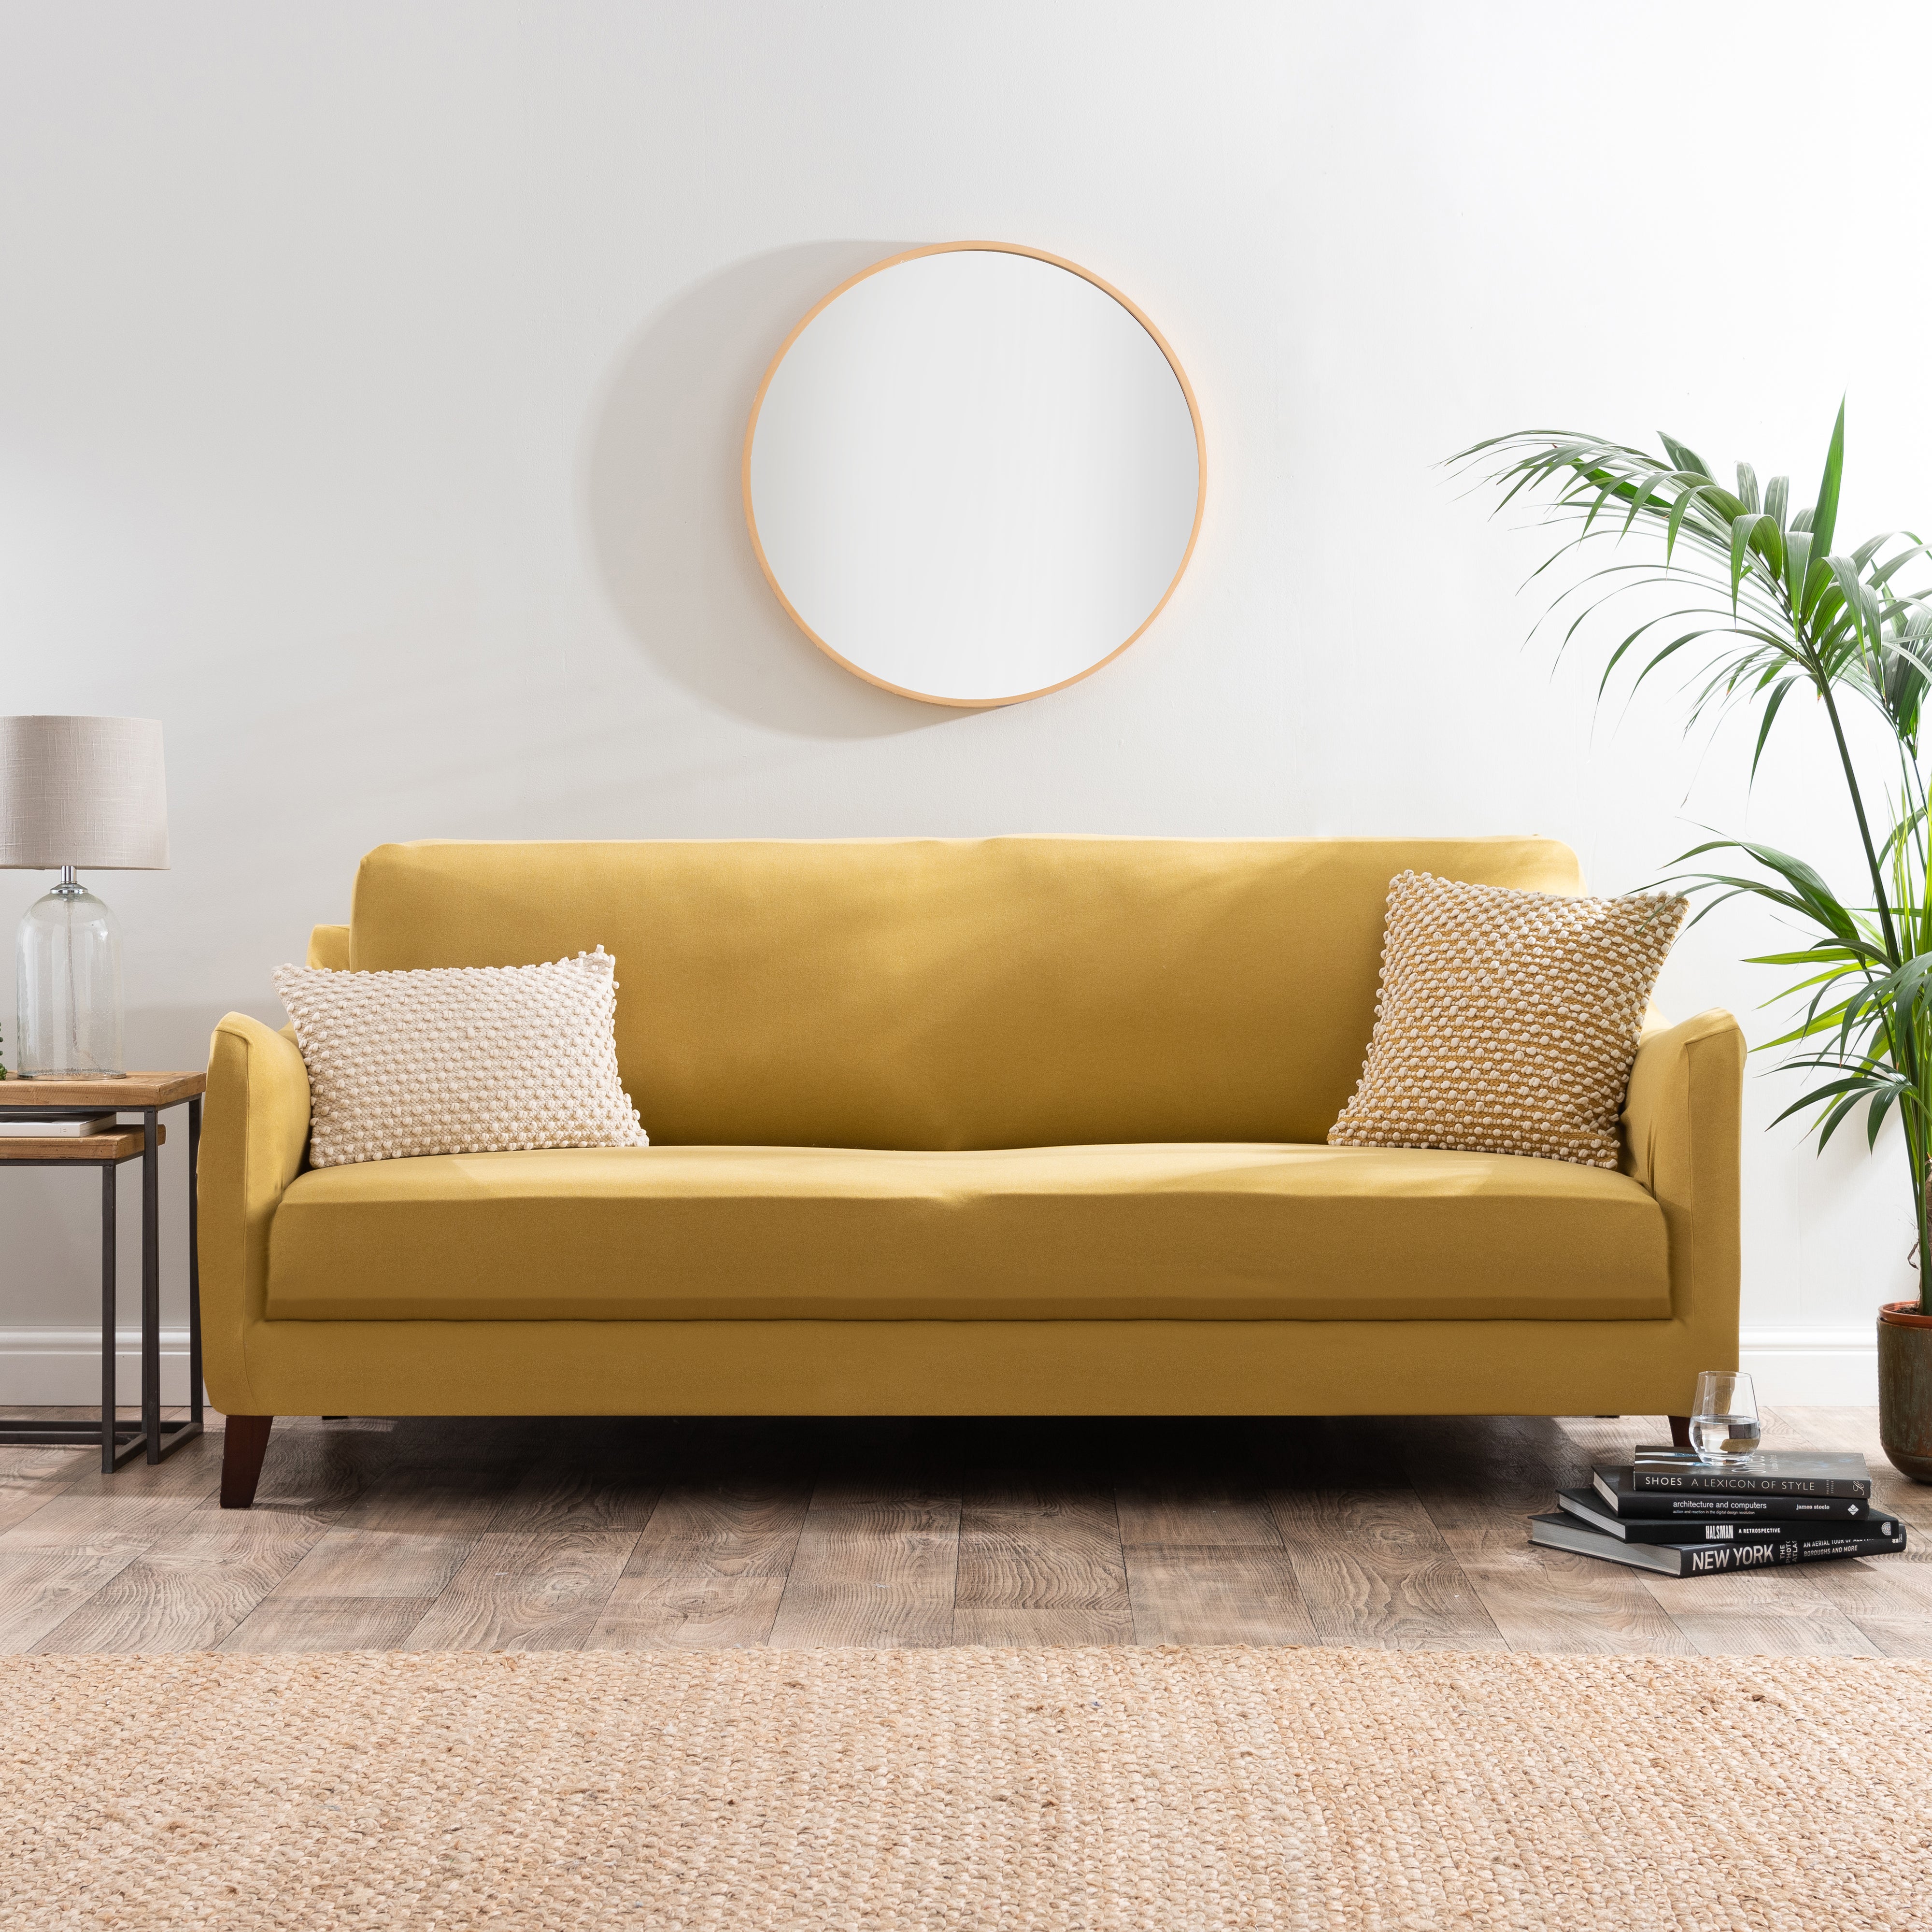 Soft Marl 3 Seat Sofa Cover Gold